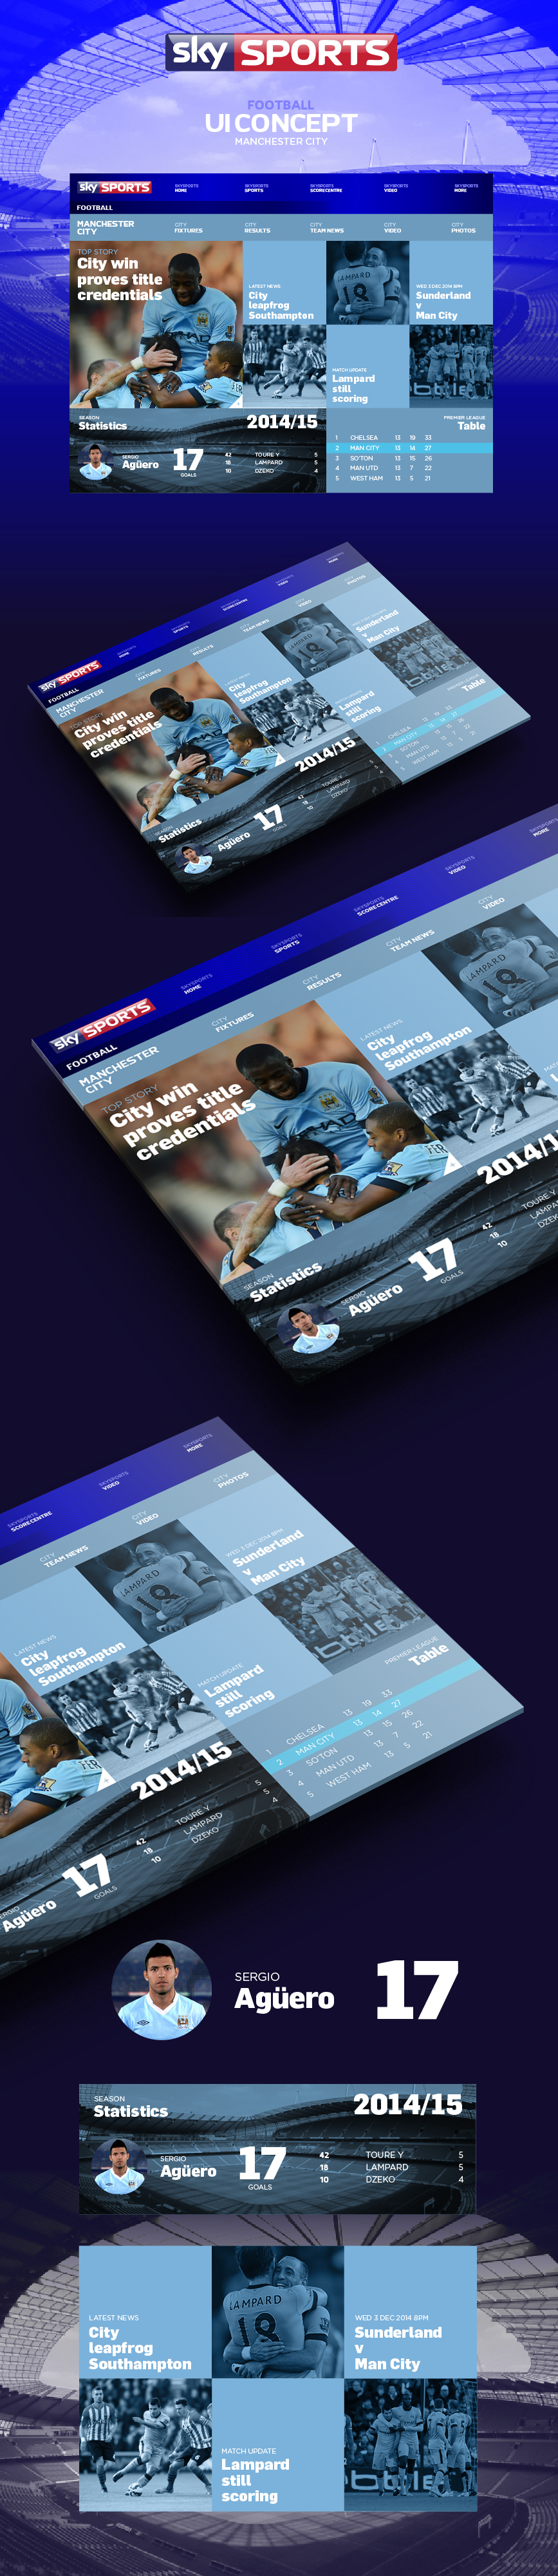 Web sports football SKY skysports UI ux grid clean rooney footballer Manchester United Responsive concept